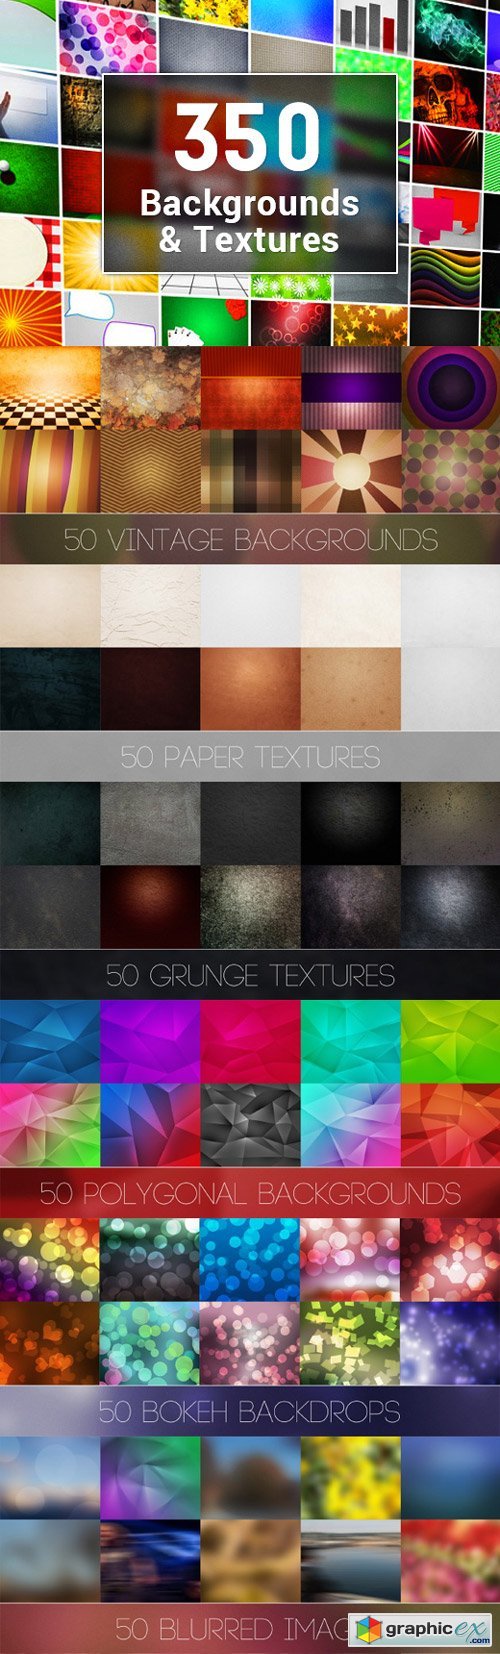 InkyDeals - 350 High-Res Digital Backgrounds & Textures with an Extended License